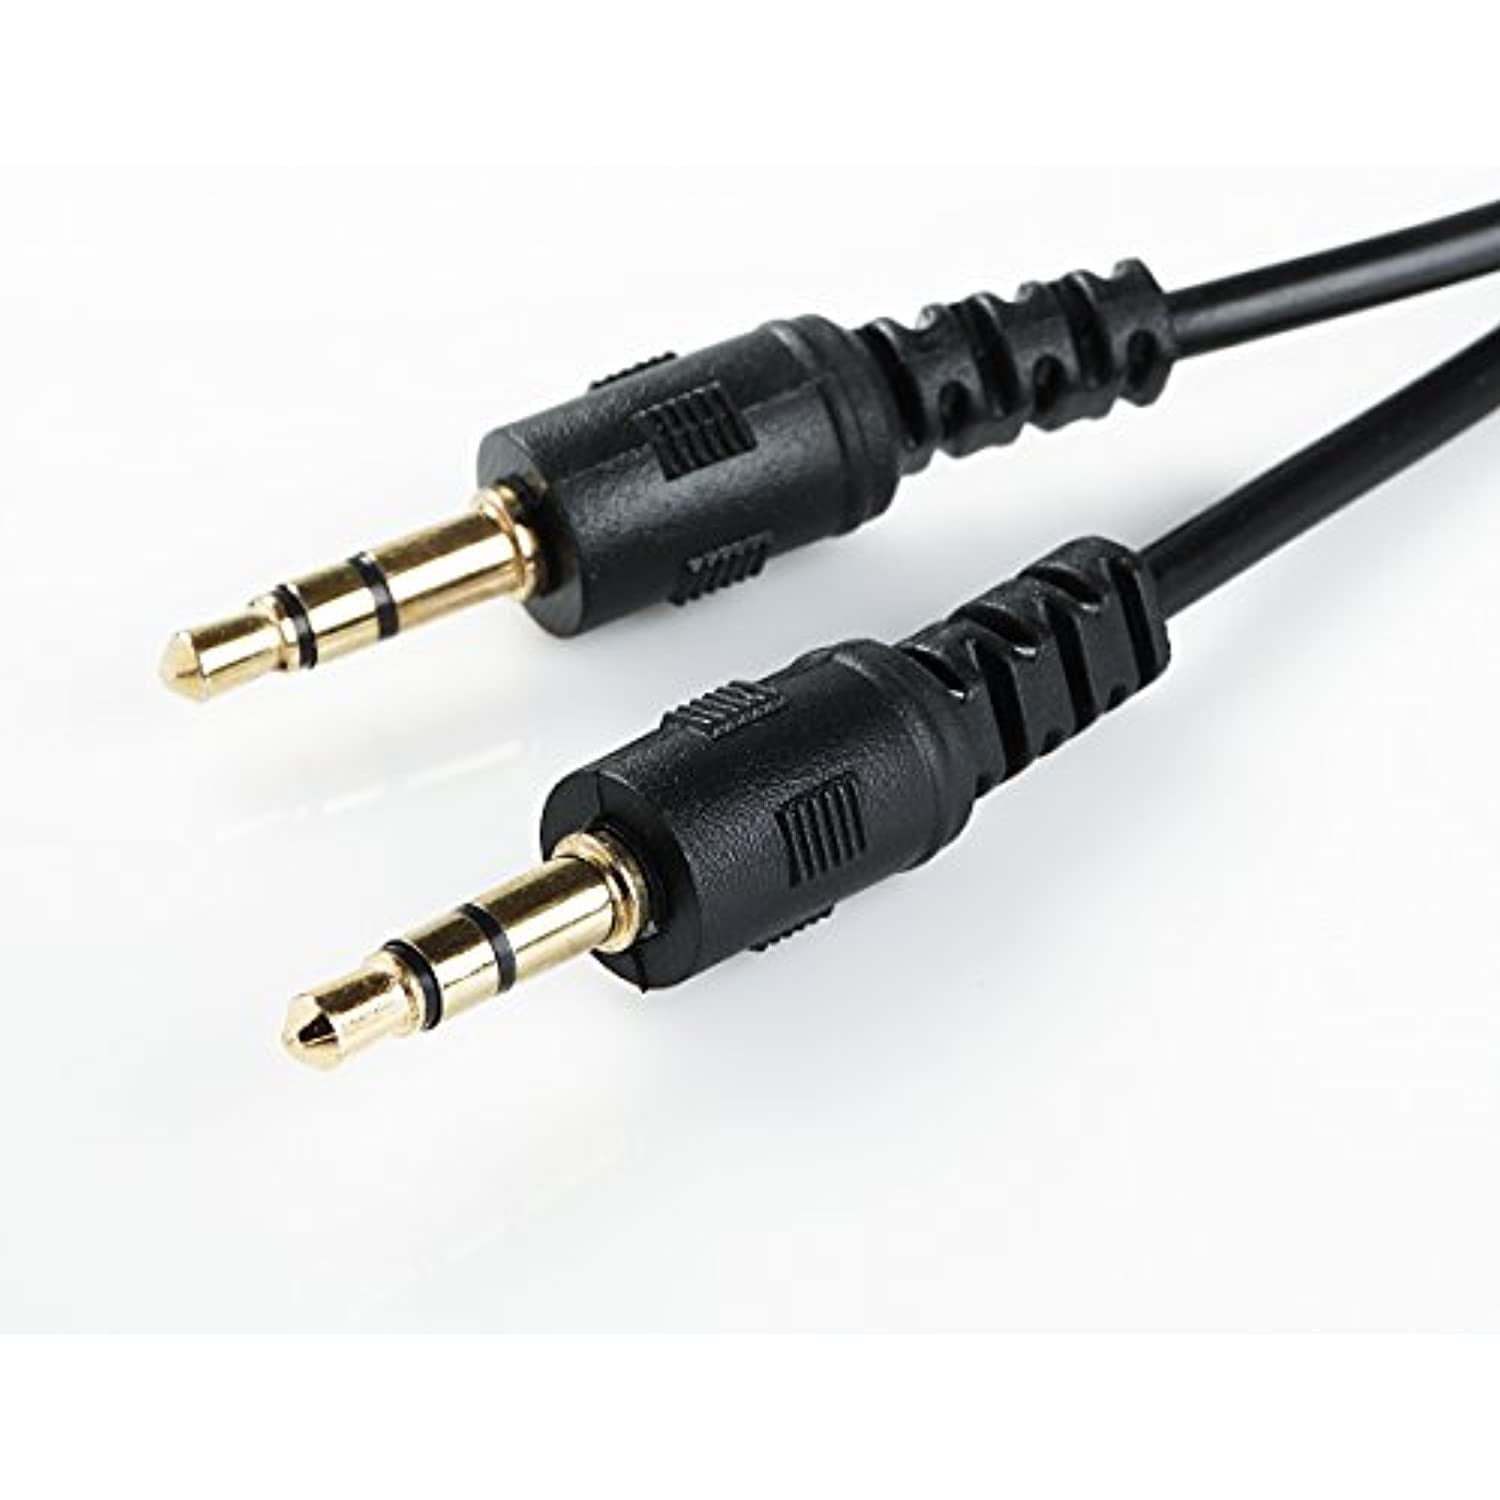 3.5mm Jack Plug To Plug Male Cable Audio Lead For PC Headphone/MP3/iPod 3FT 6FT 